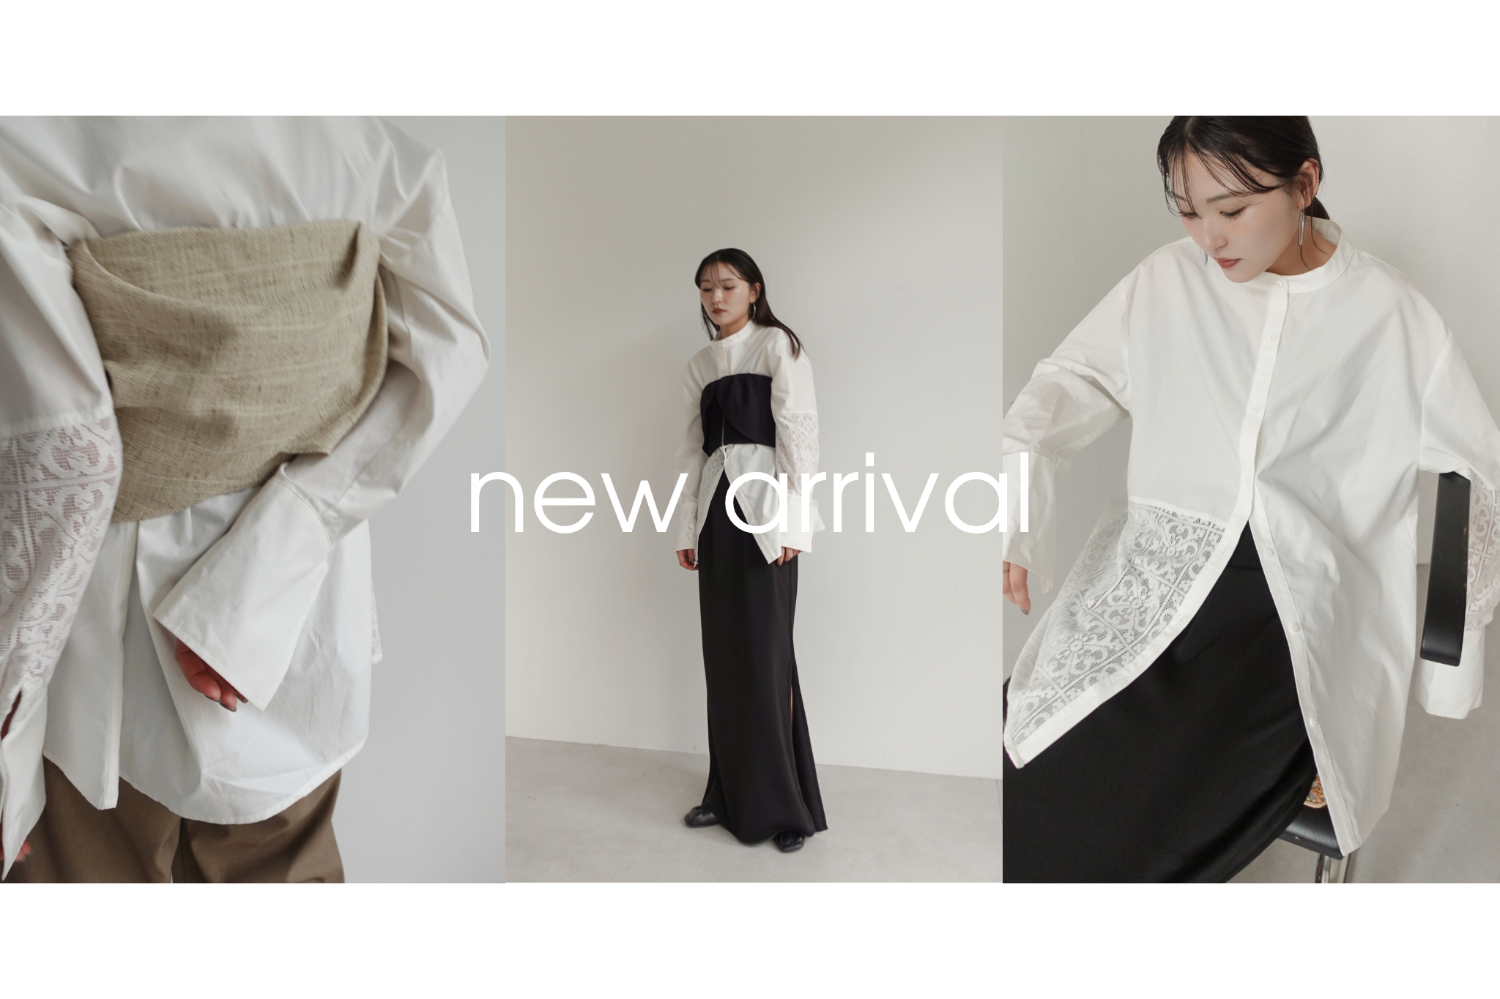 3/8 21:00- new arrival.